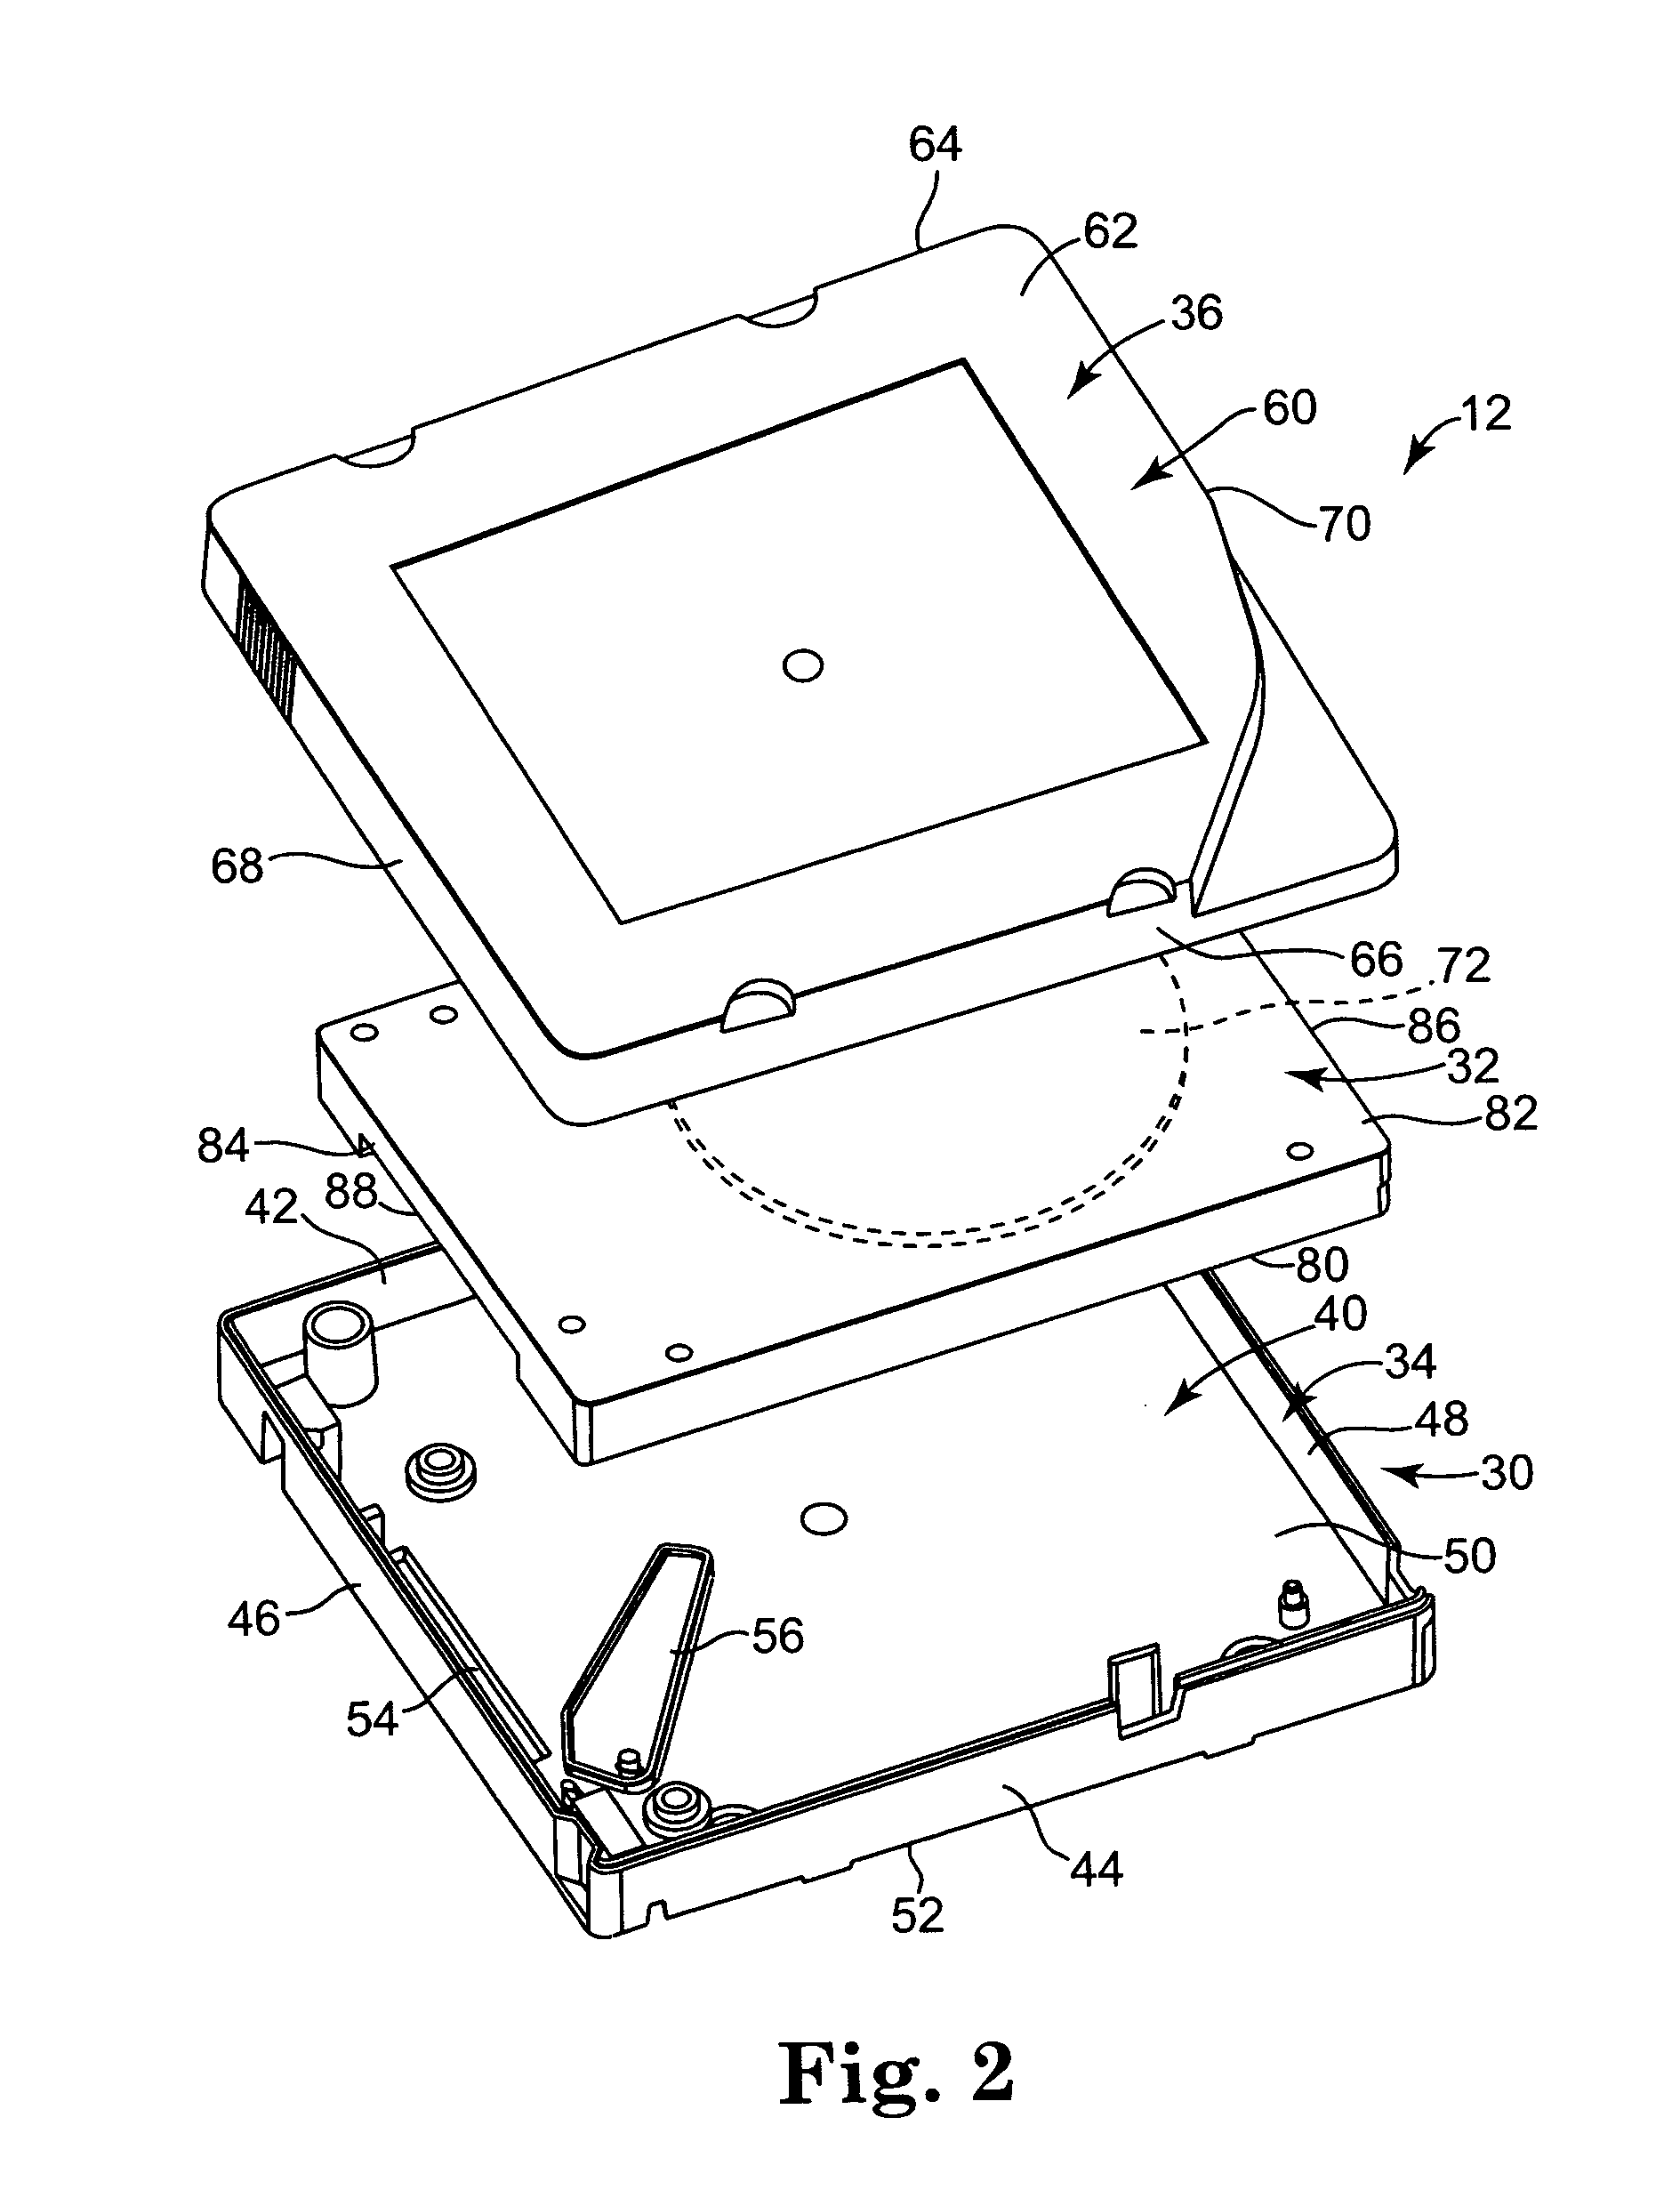 Electronic data connector of data storage cartridge and associated cartridge drive